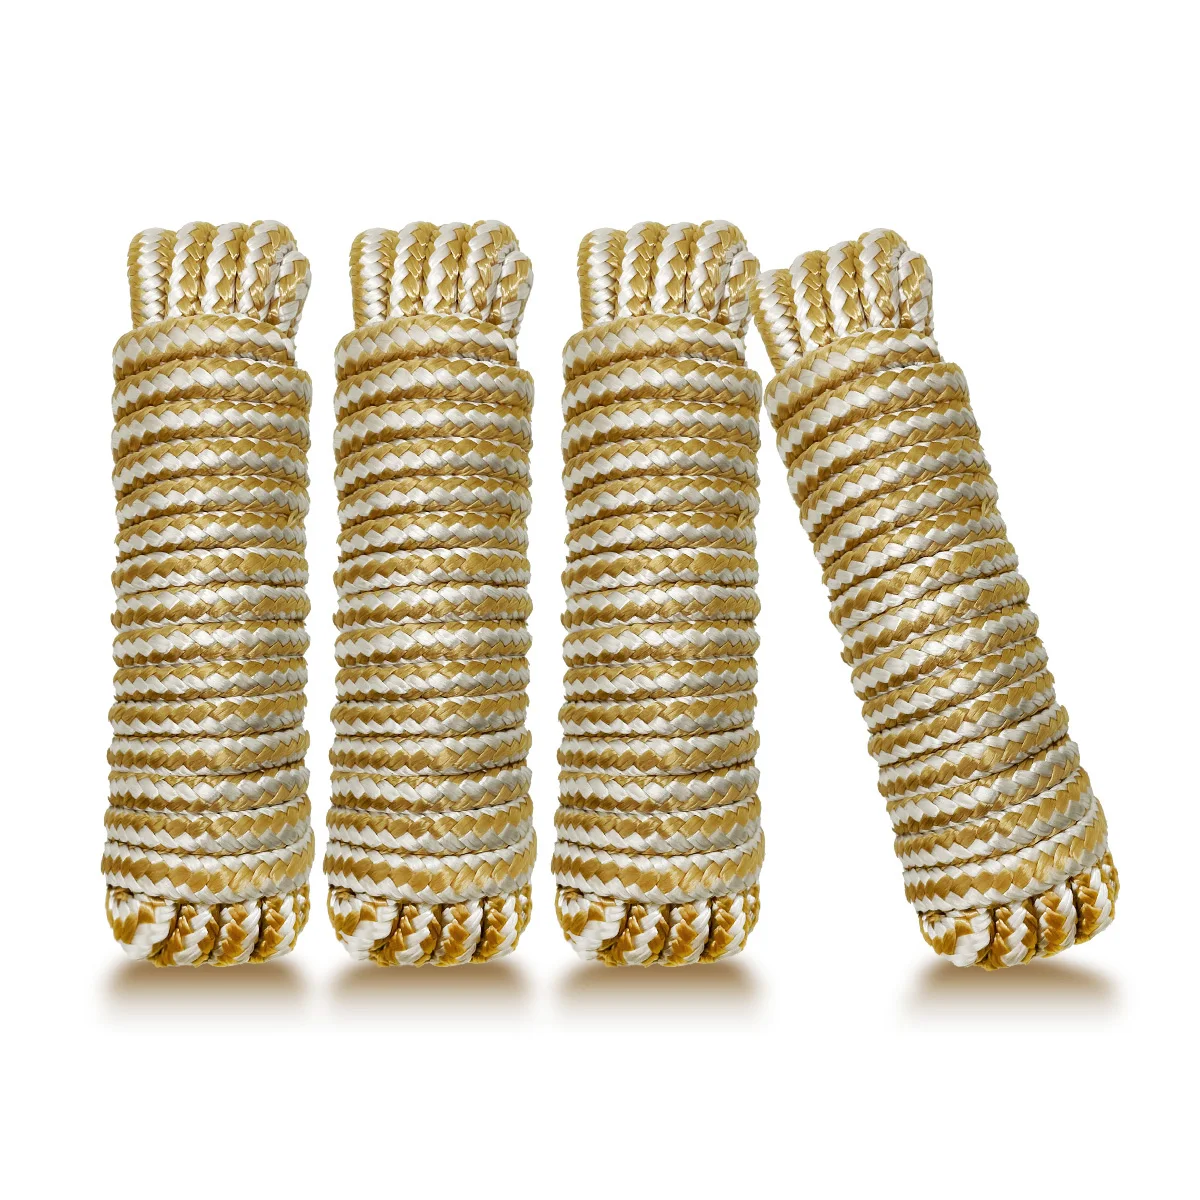 Barci Dock Lines Rope